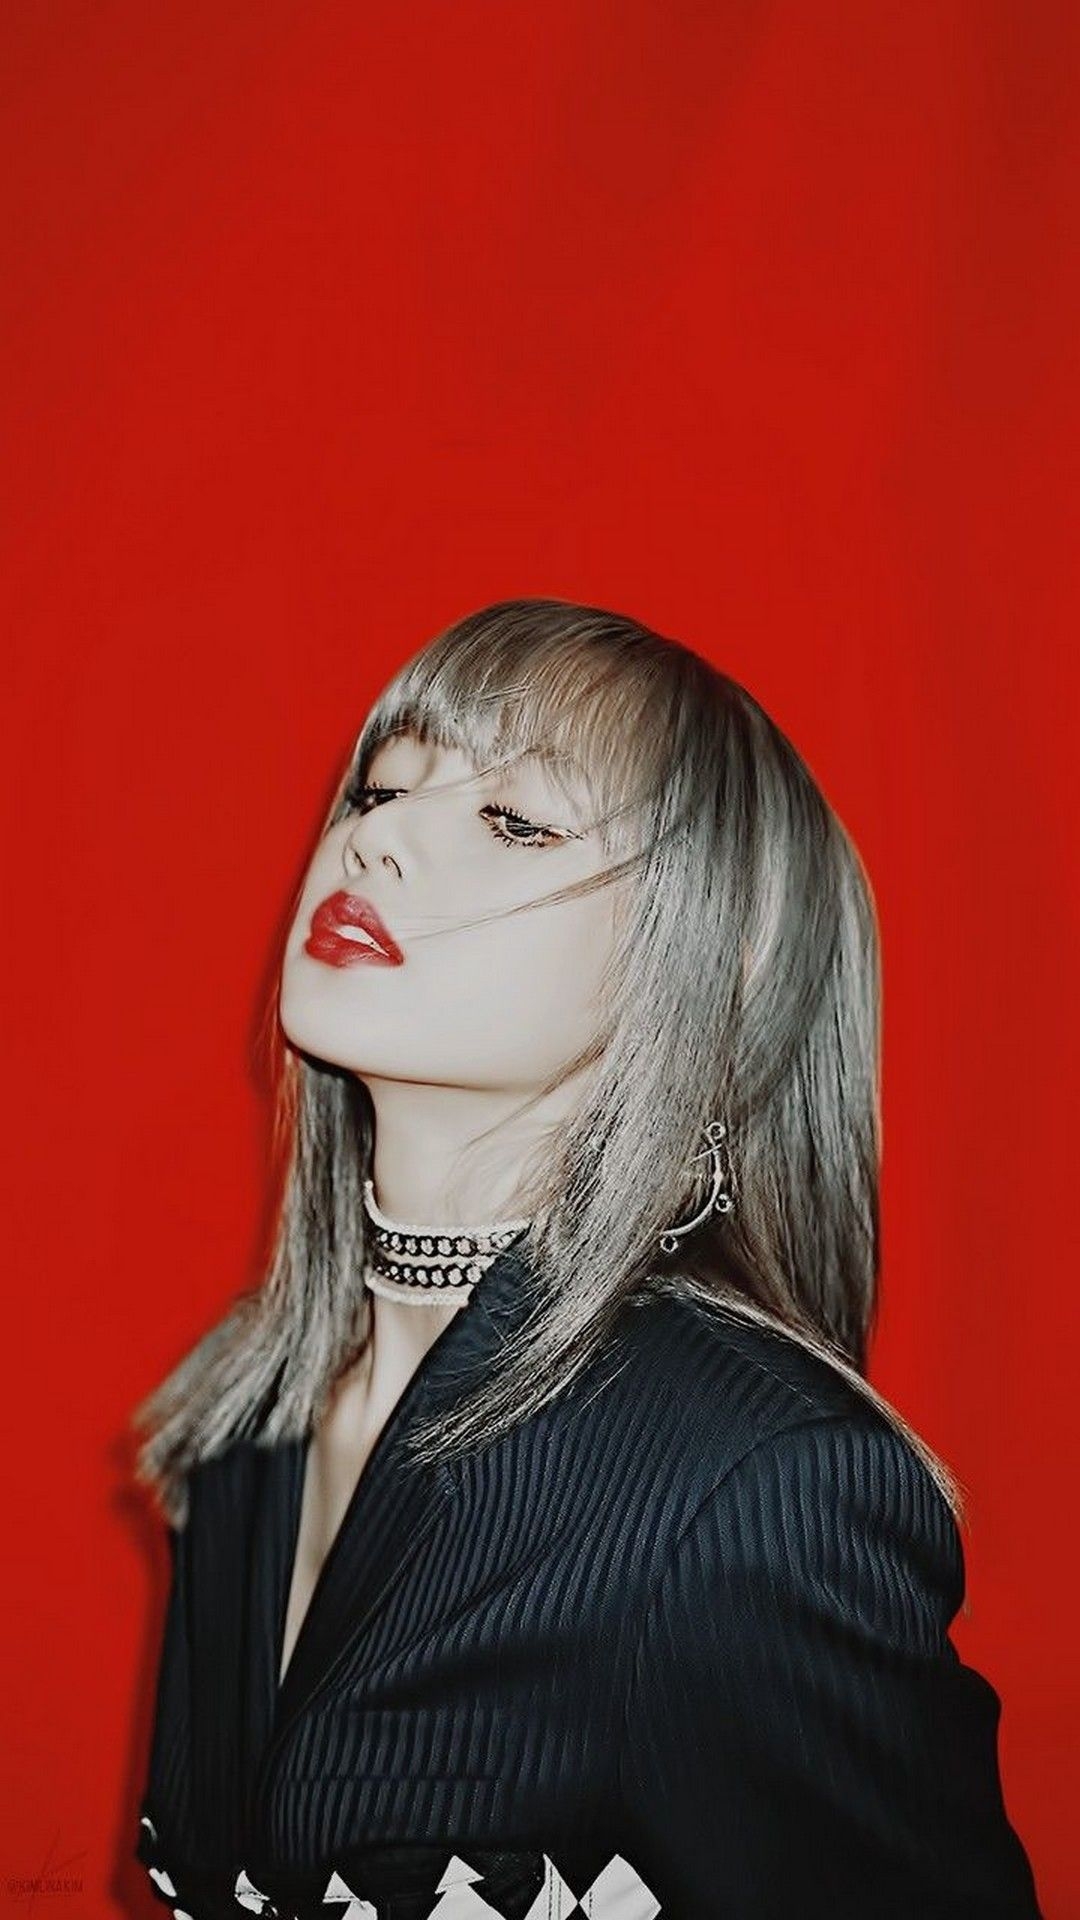 Lisa Blackpink Wallpaper for Phones with high-resolution x